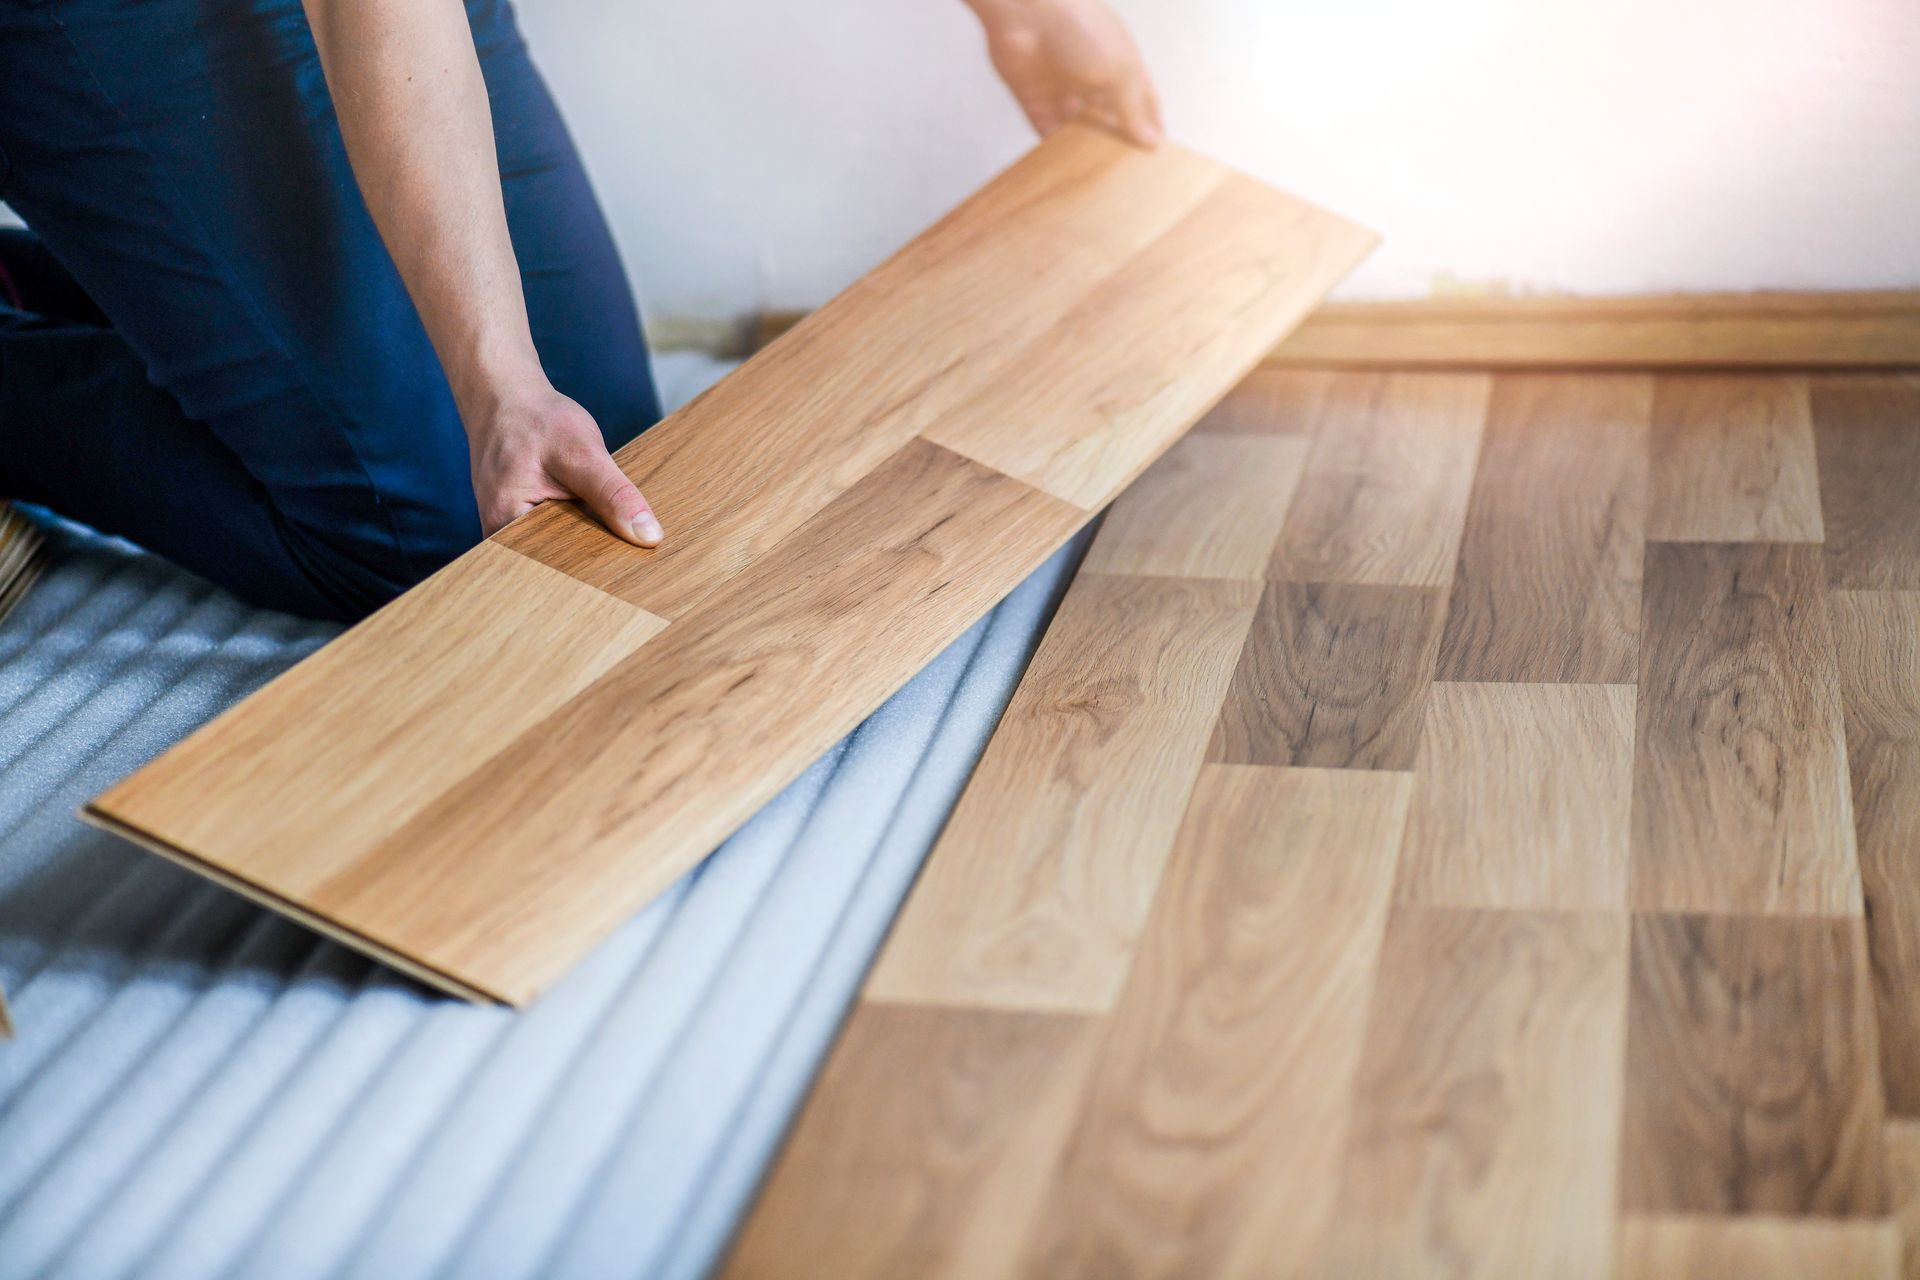 a person is installing a wooden floor in a room 